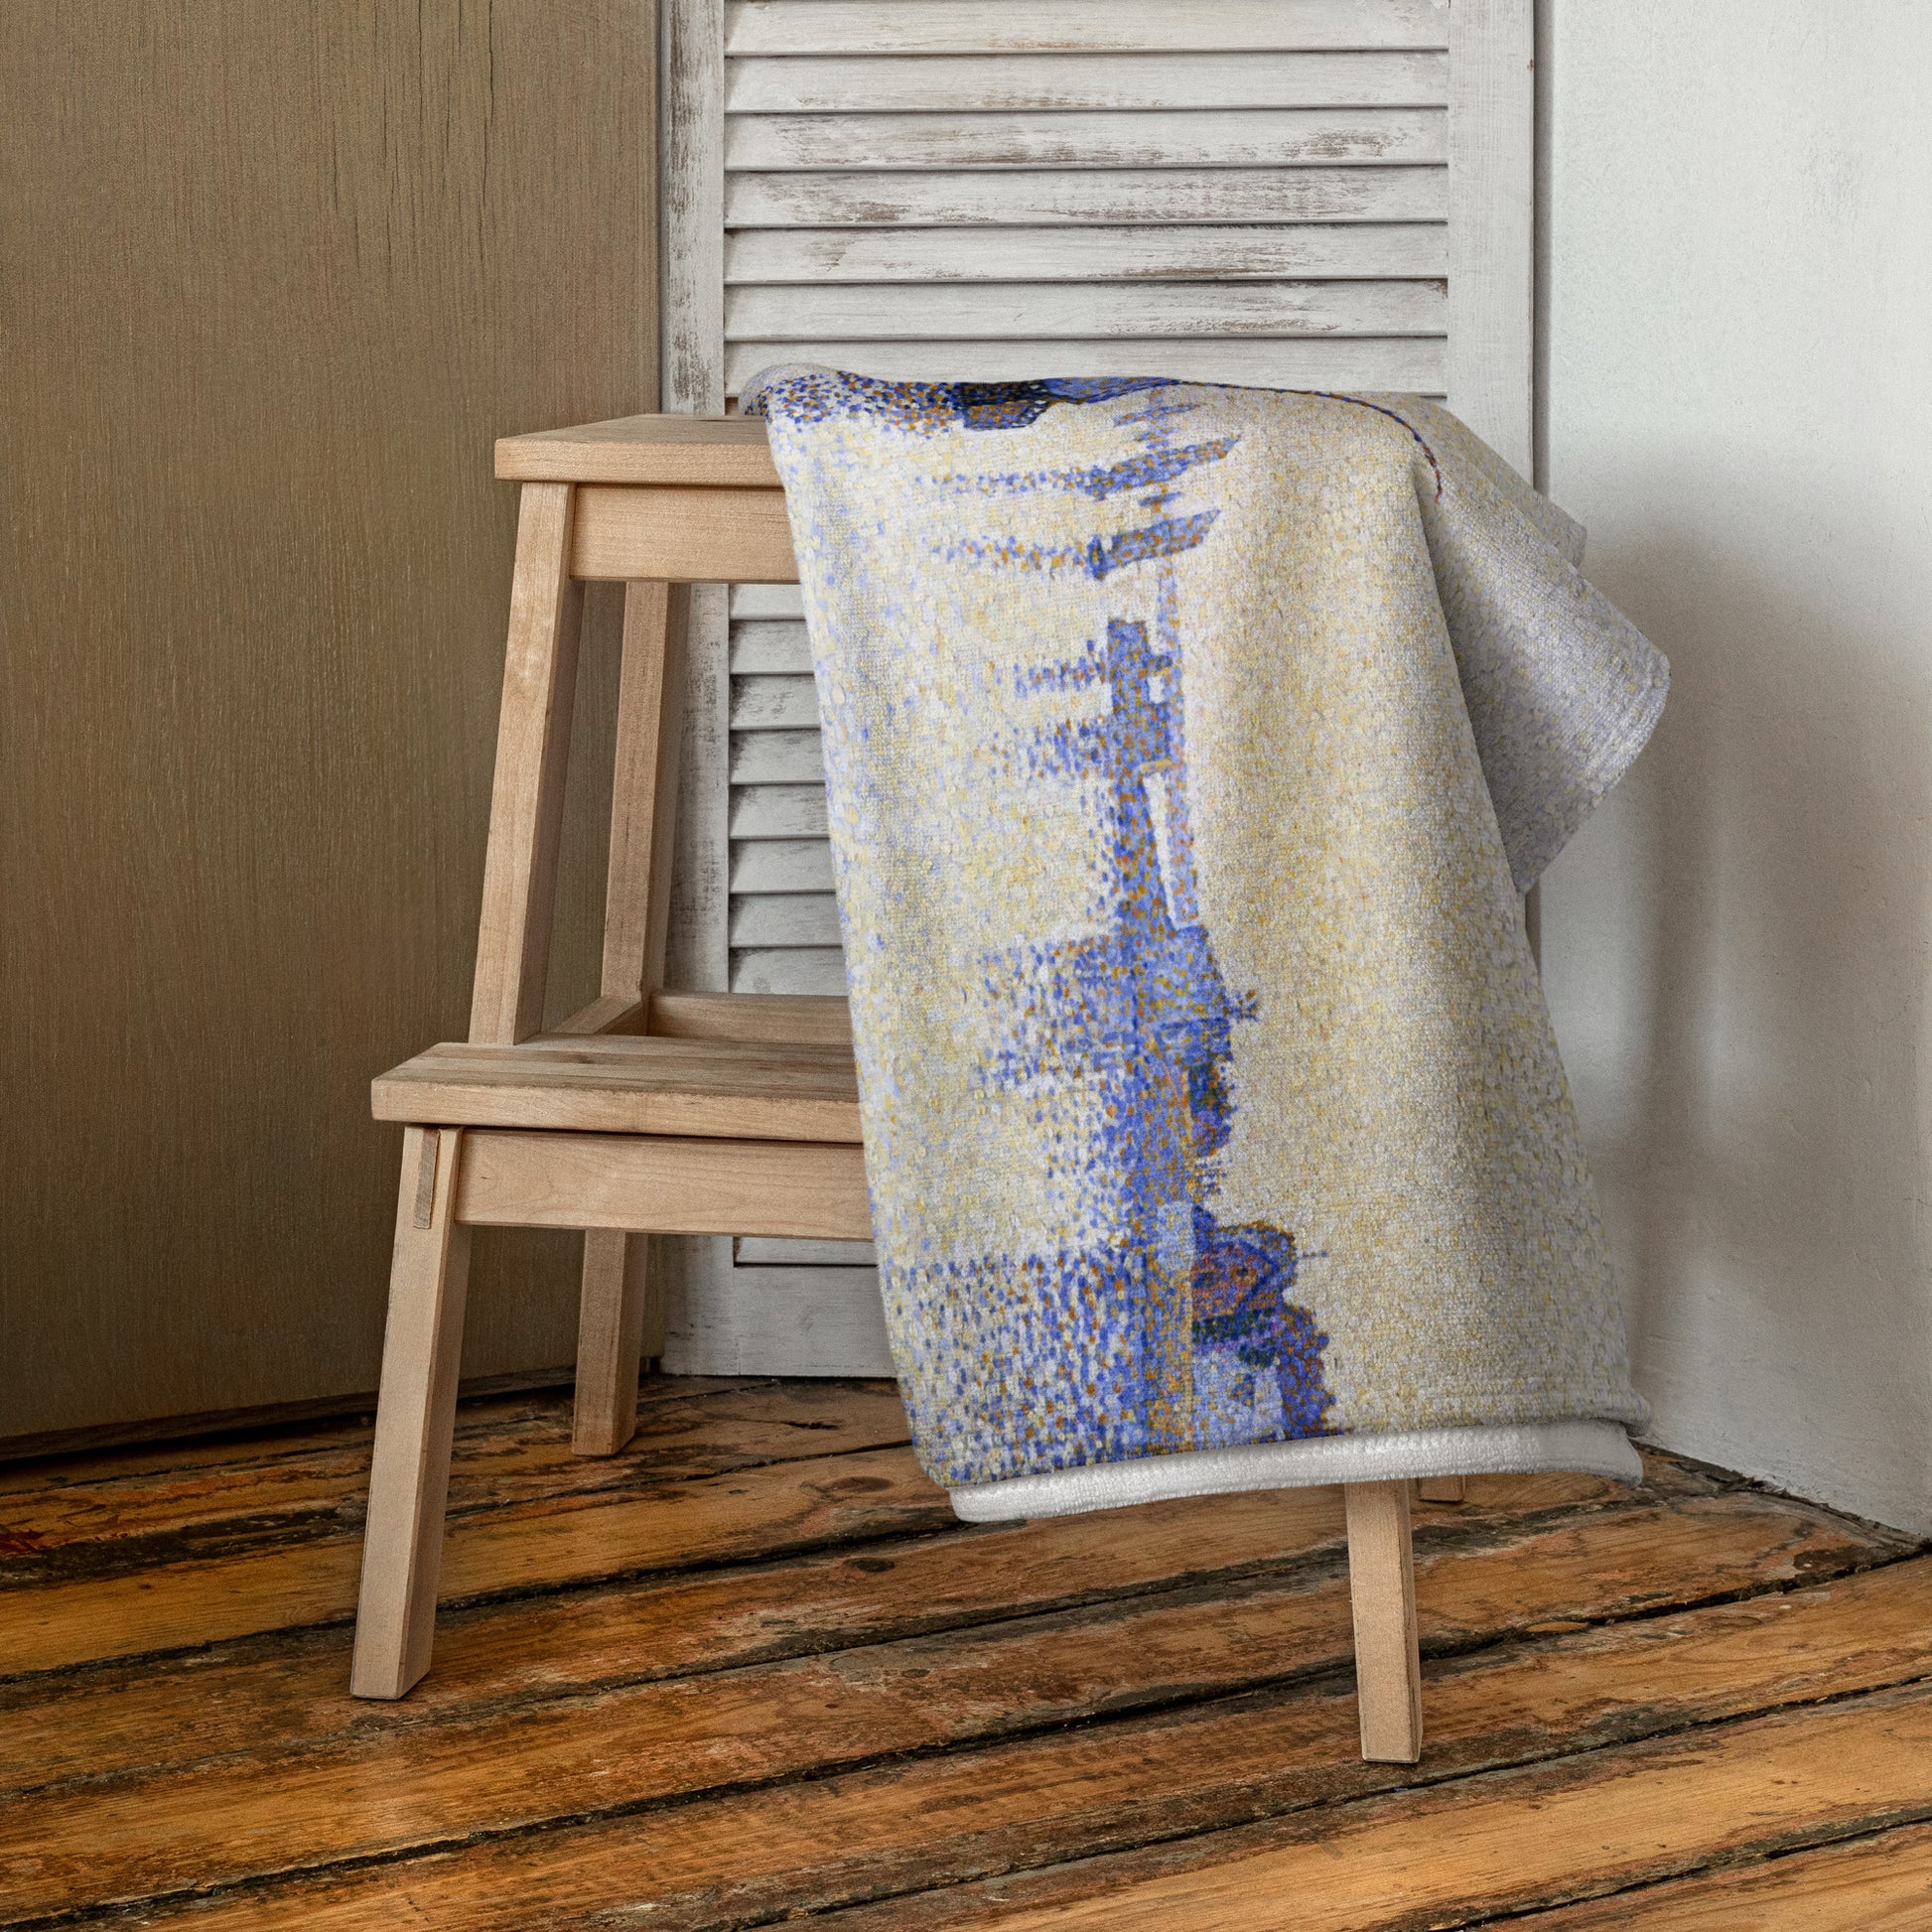 Beach towel featuring painting 'Evening calm, Concarneau' by Paul Signac, hanging over a chair in a room